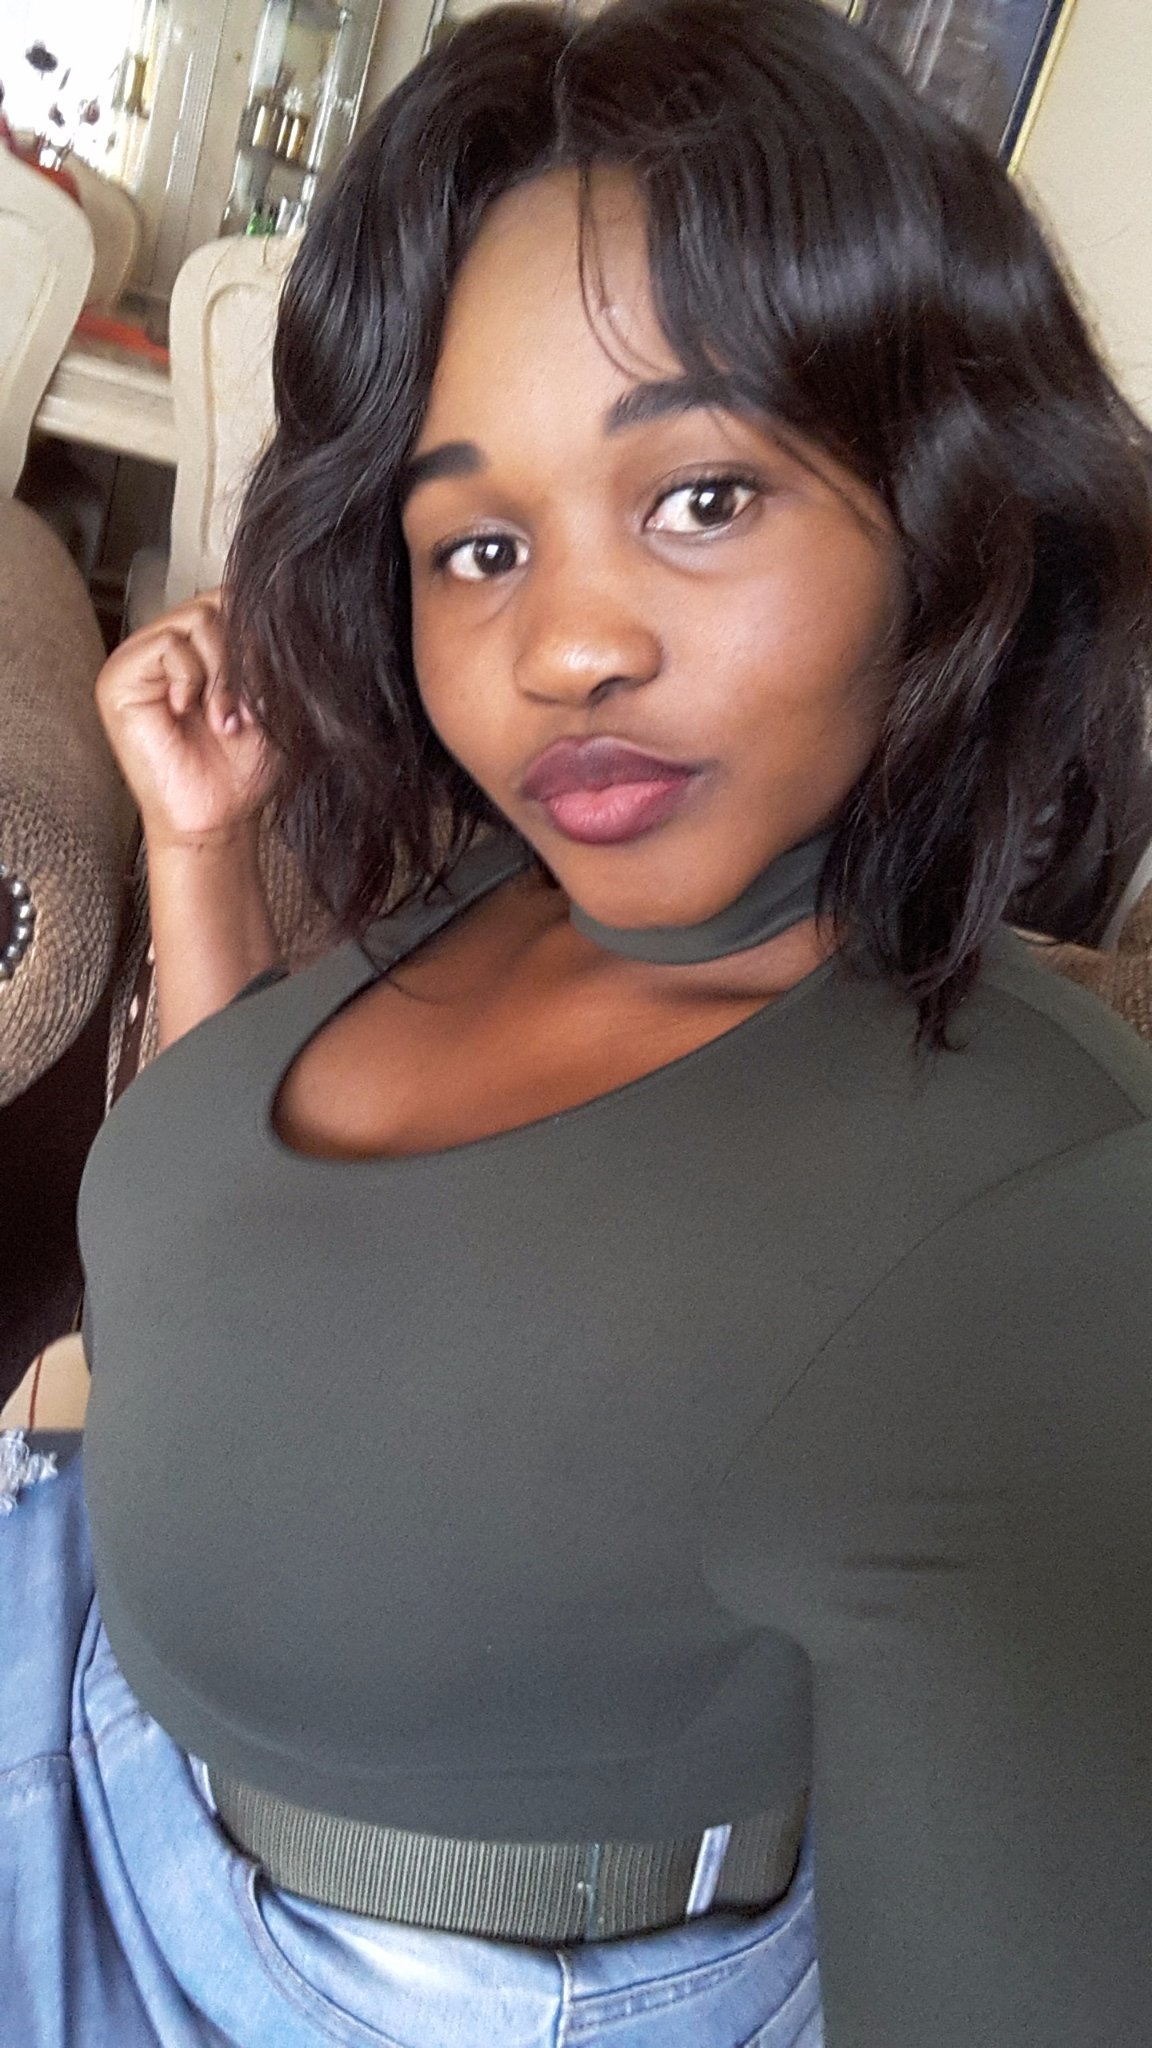 ●Libra♎
●Future Nutrition and Dietician❤ 
●Bubbliest Bubble😊 
●Writer📖
●Lover of Art🎨and History🗿
●Cook🍴
●Car fanatic 🚘
●Plus Size Model💎